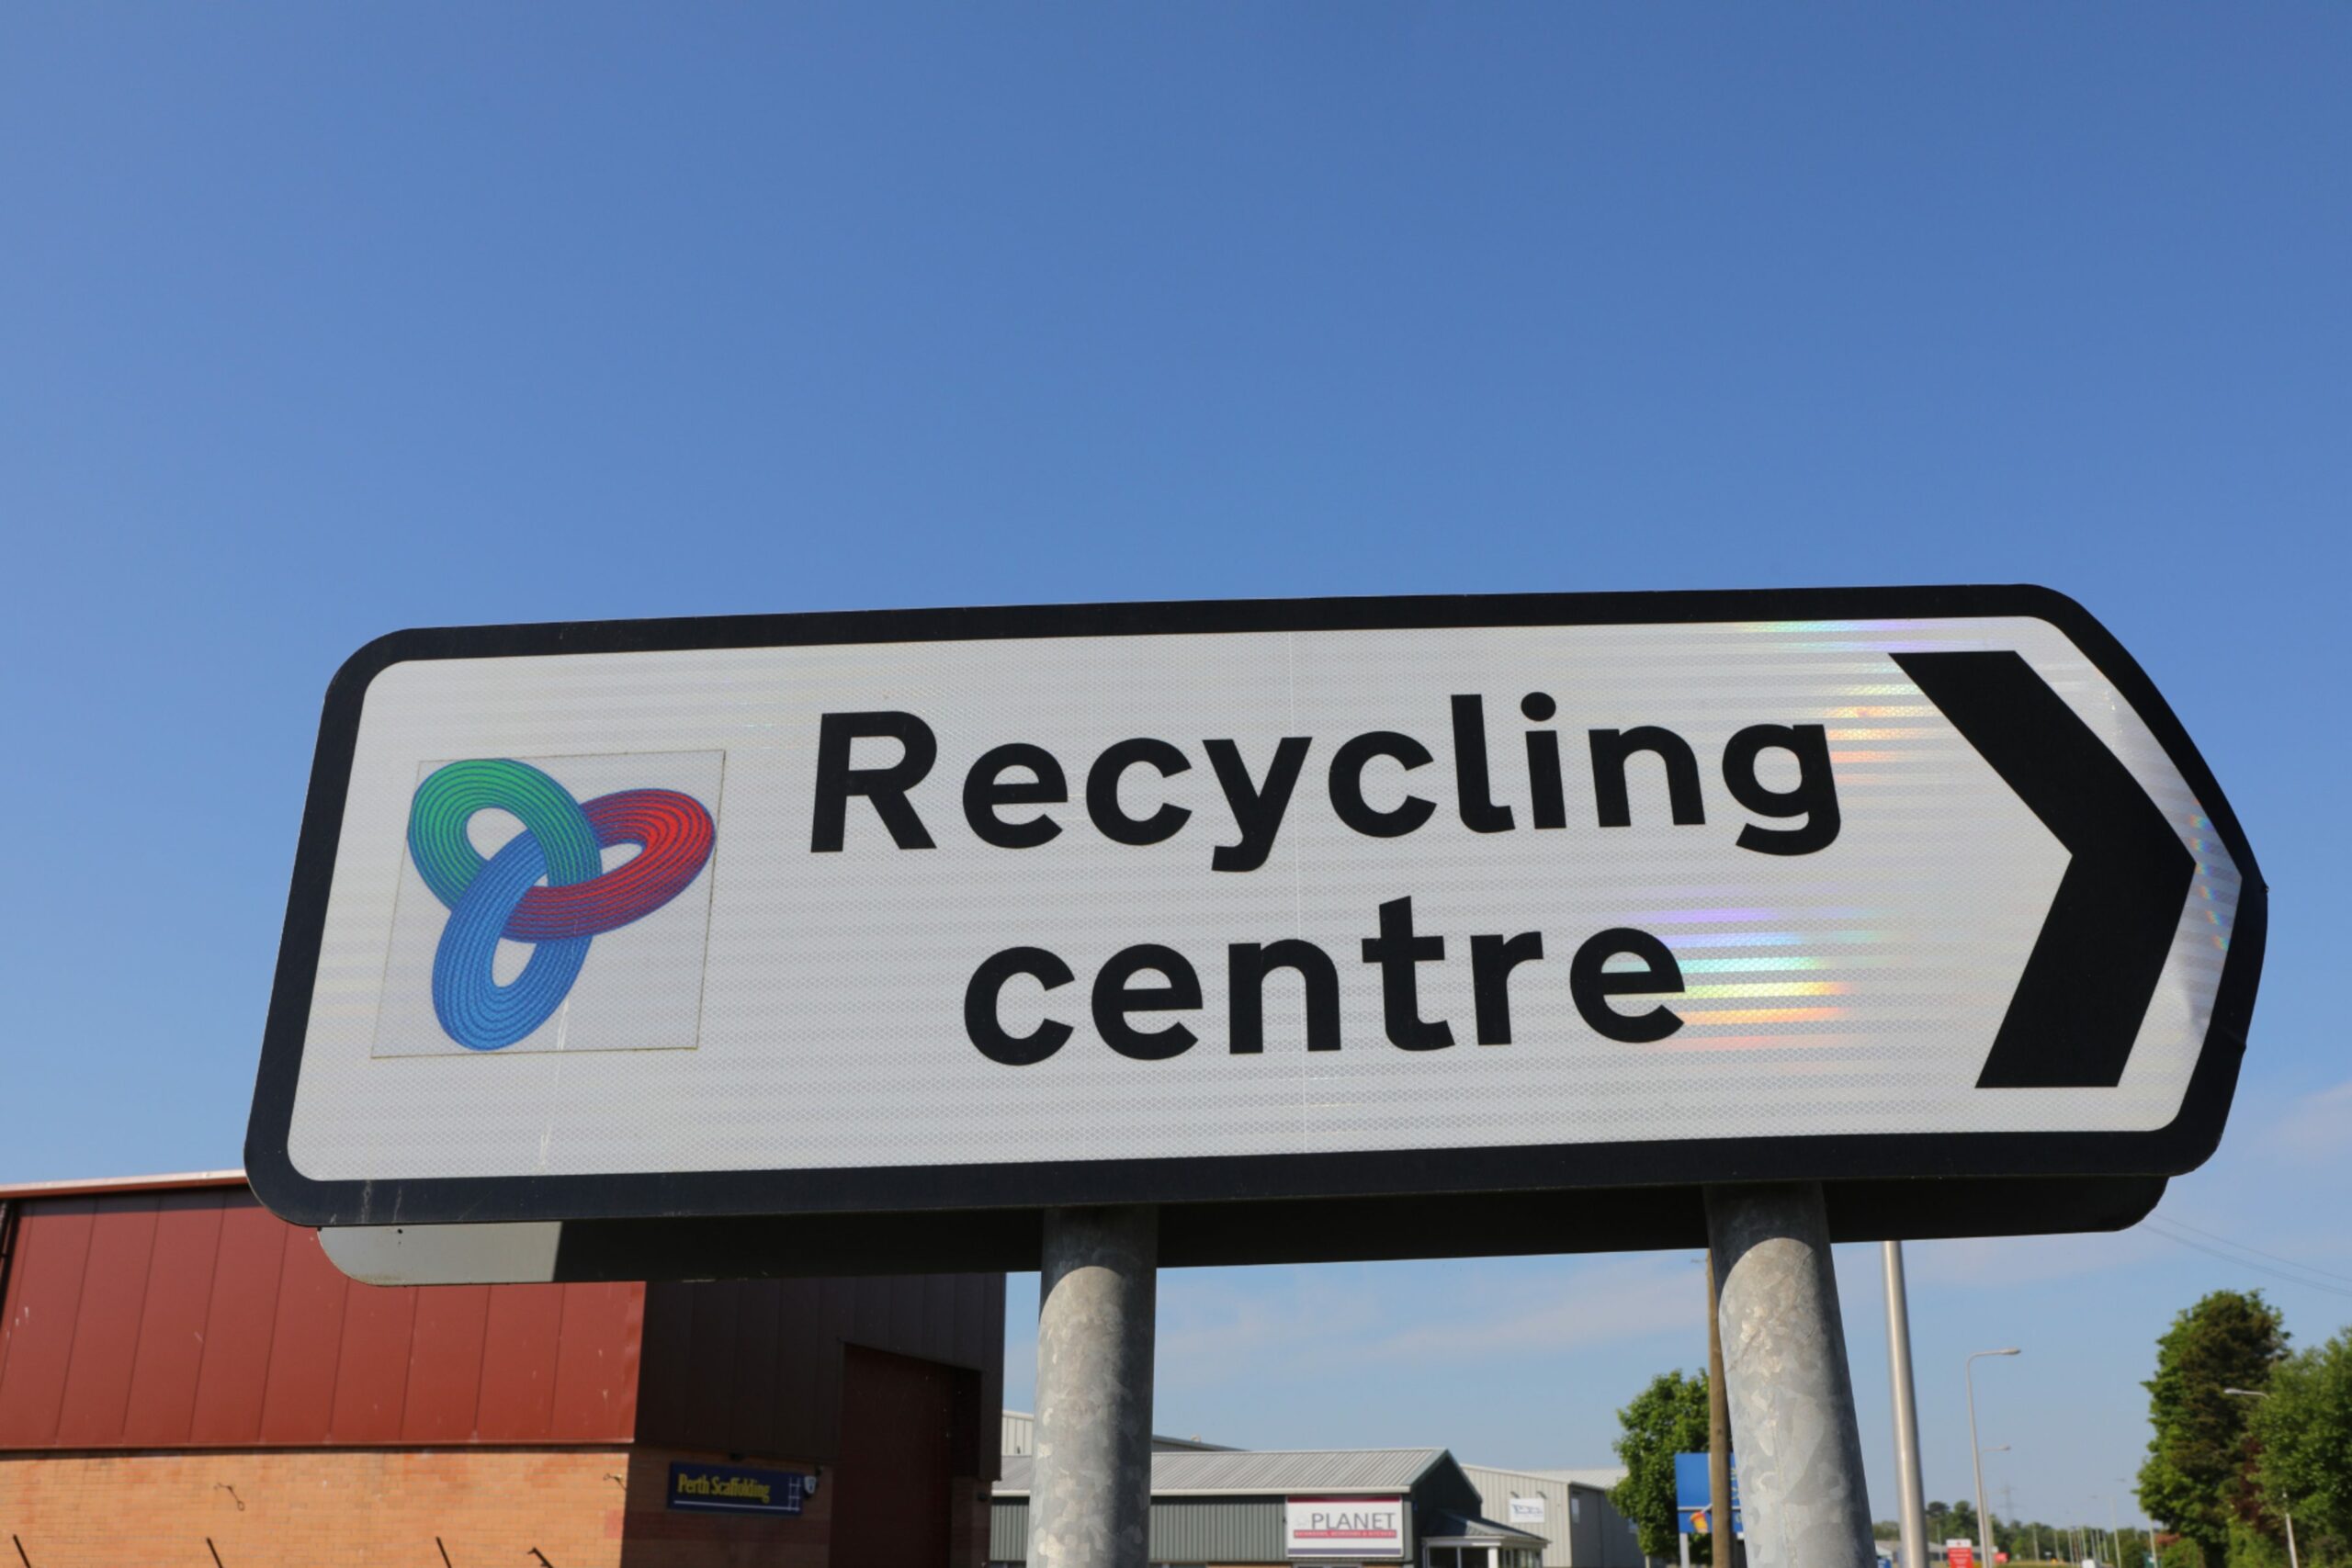 A Recycling centre road sign